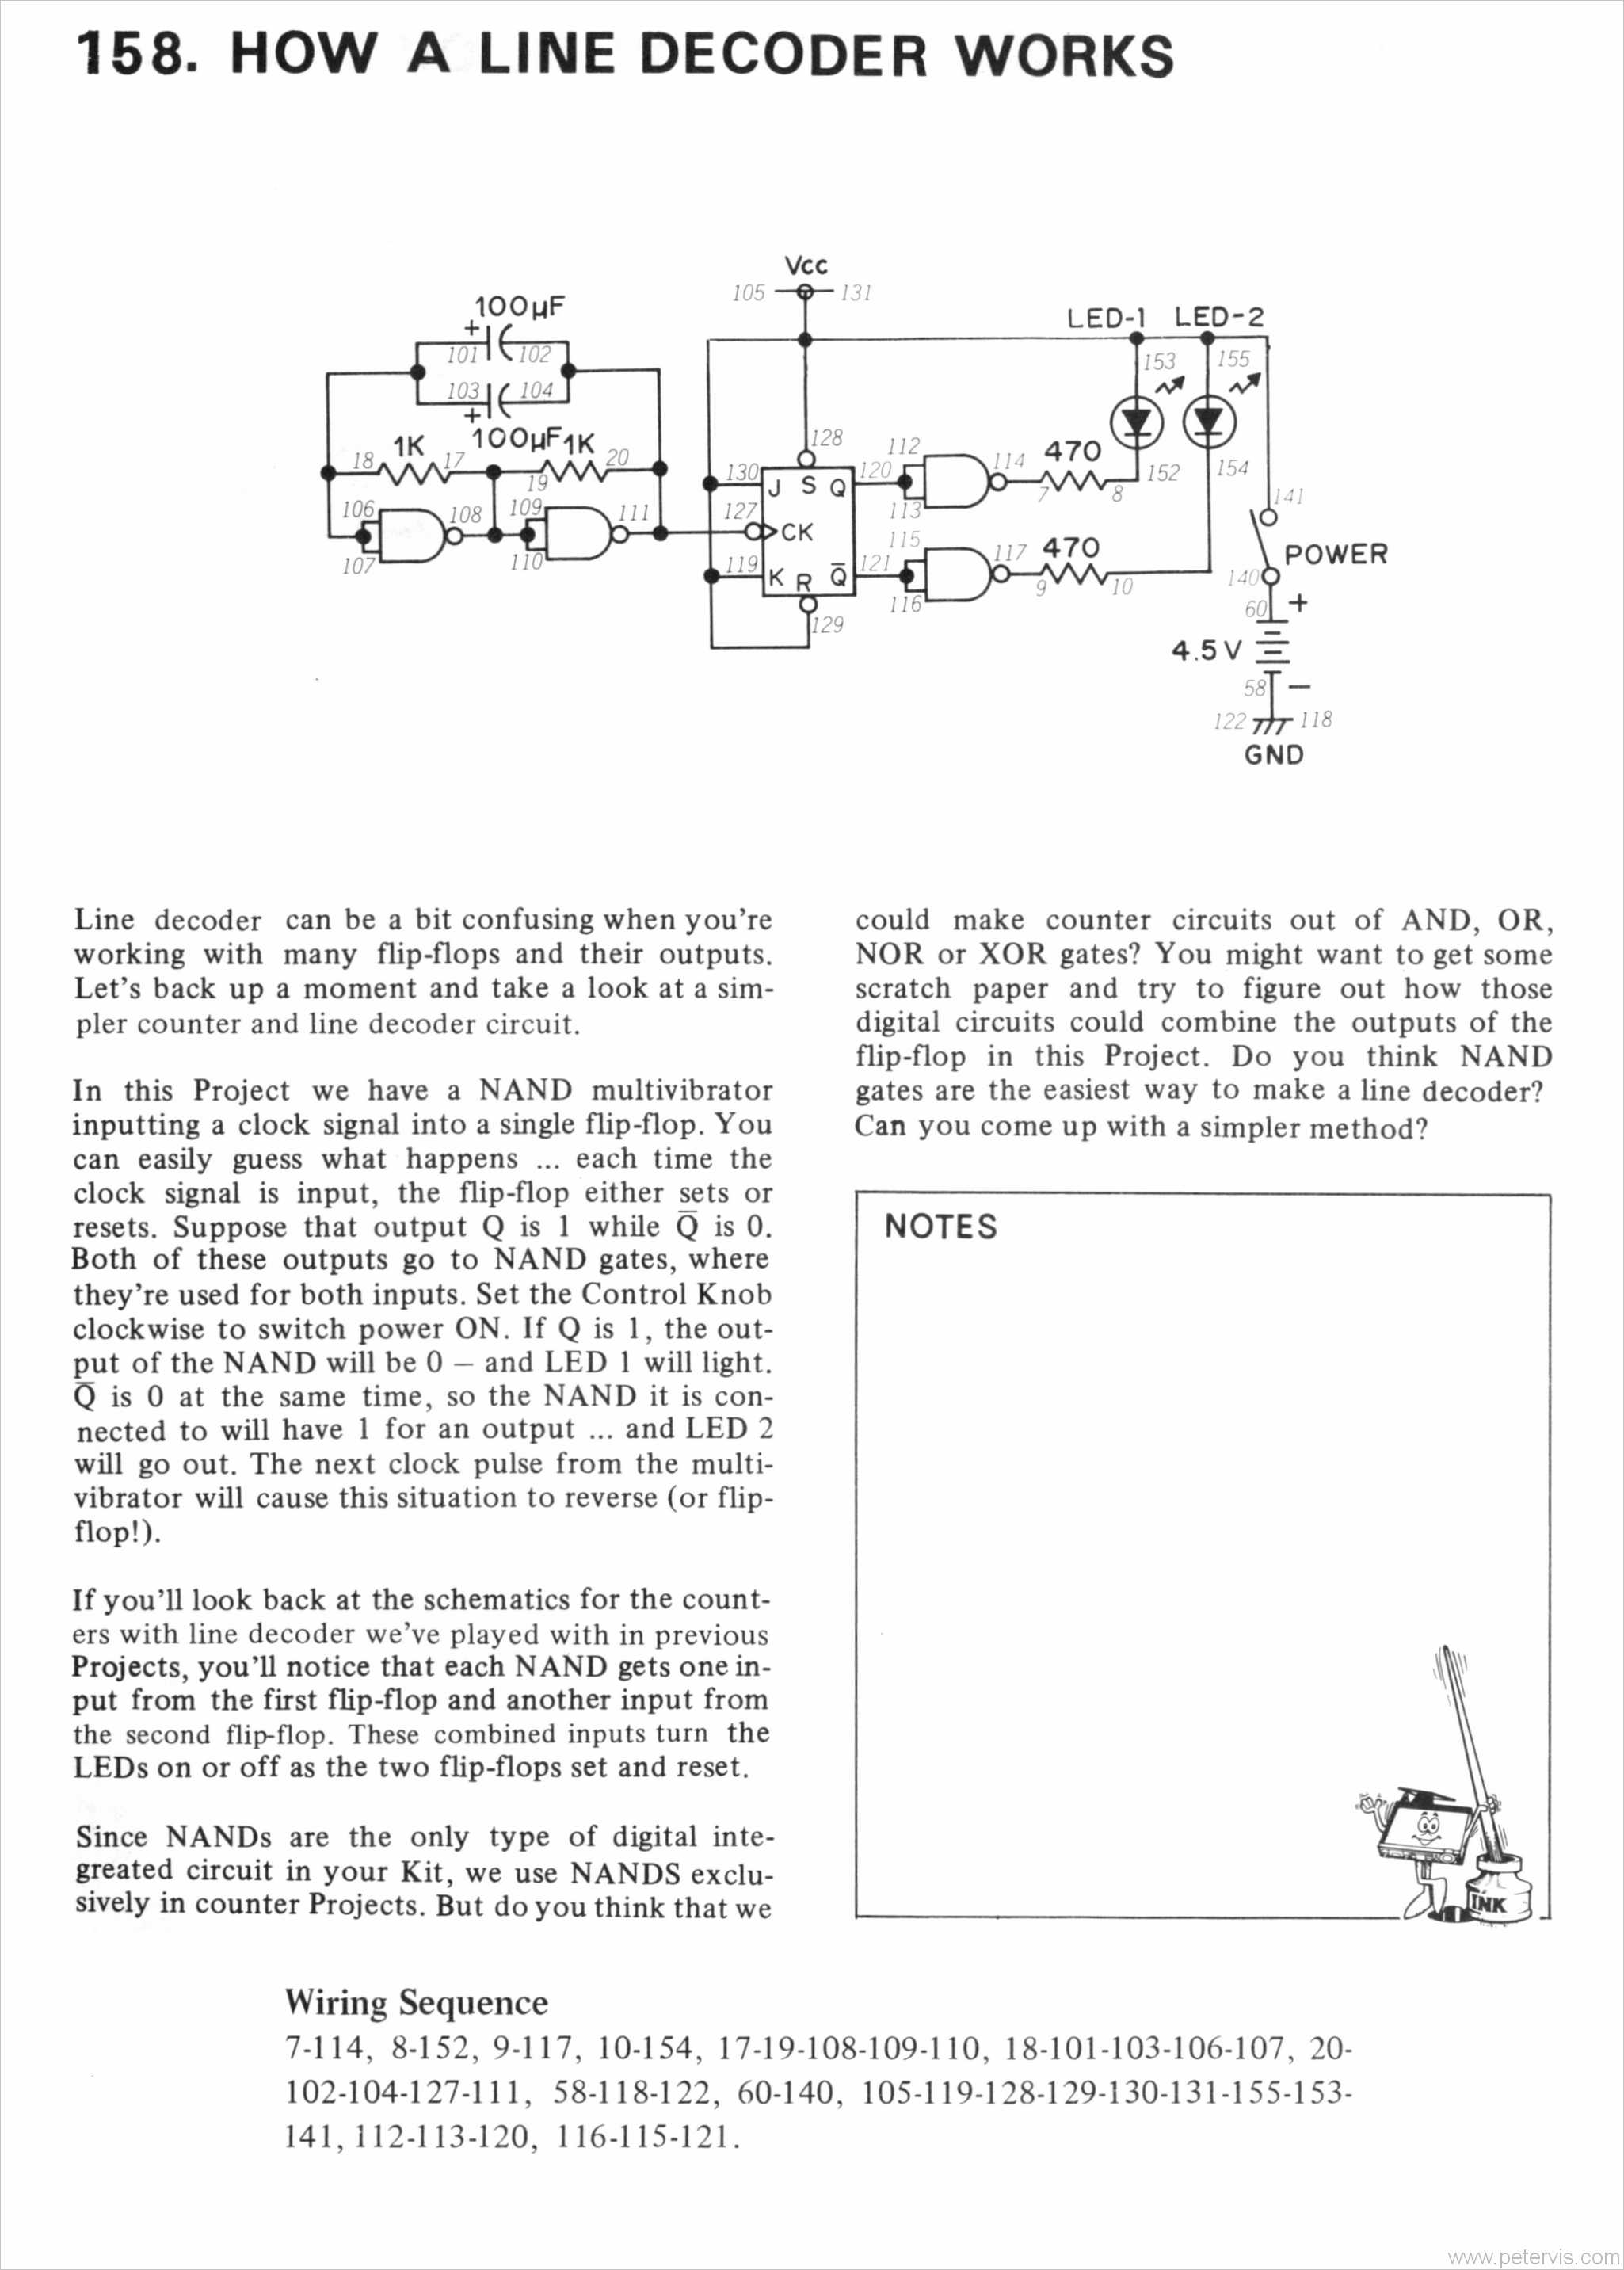 158 HOW A LINE DECODER WORKS